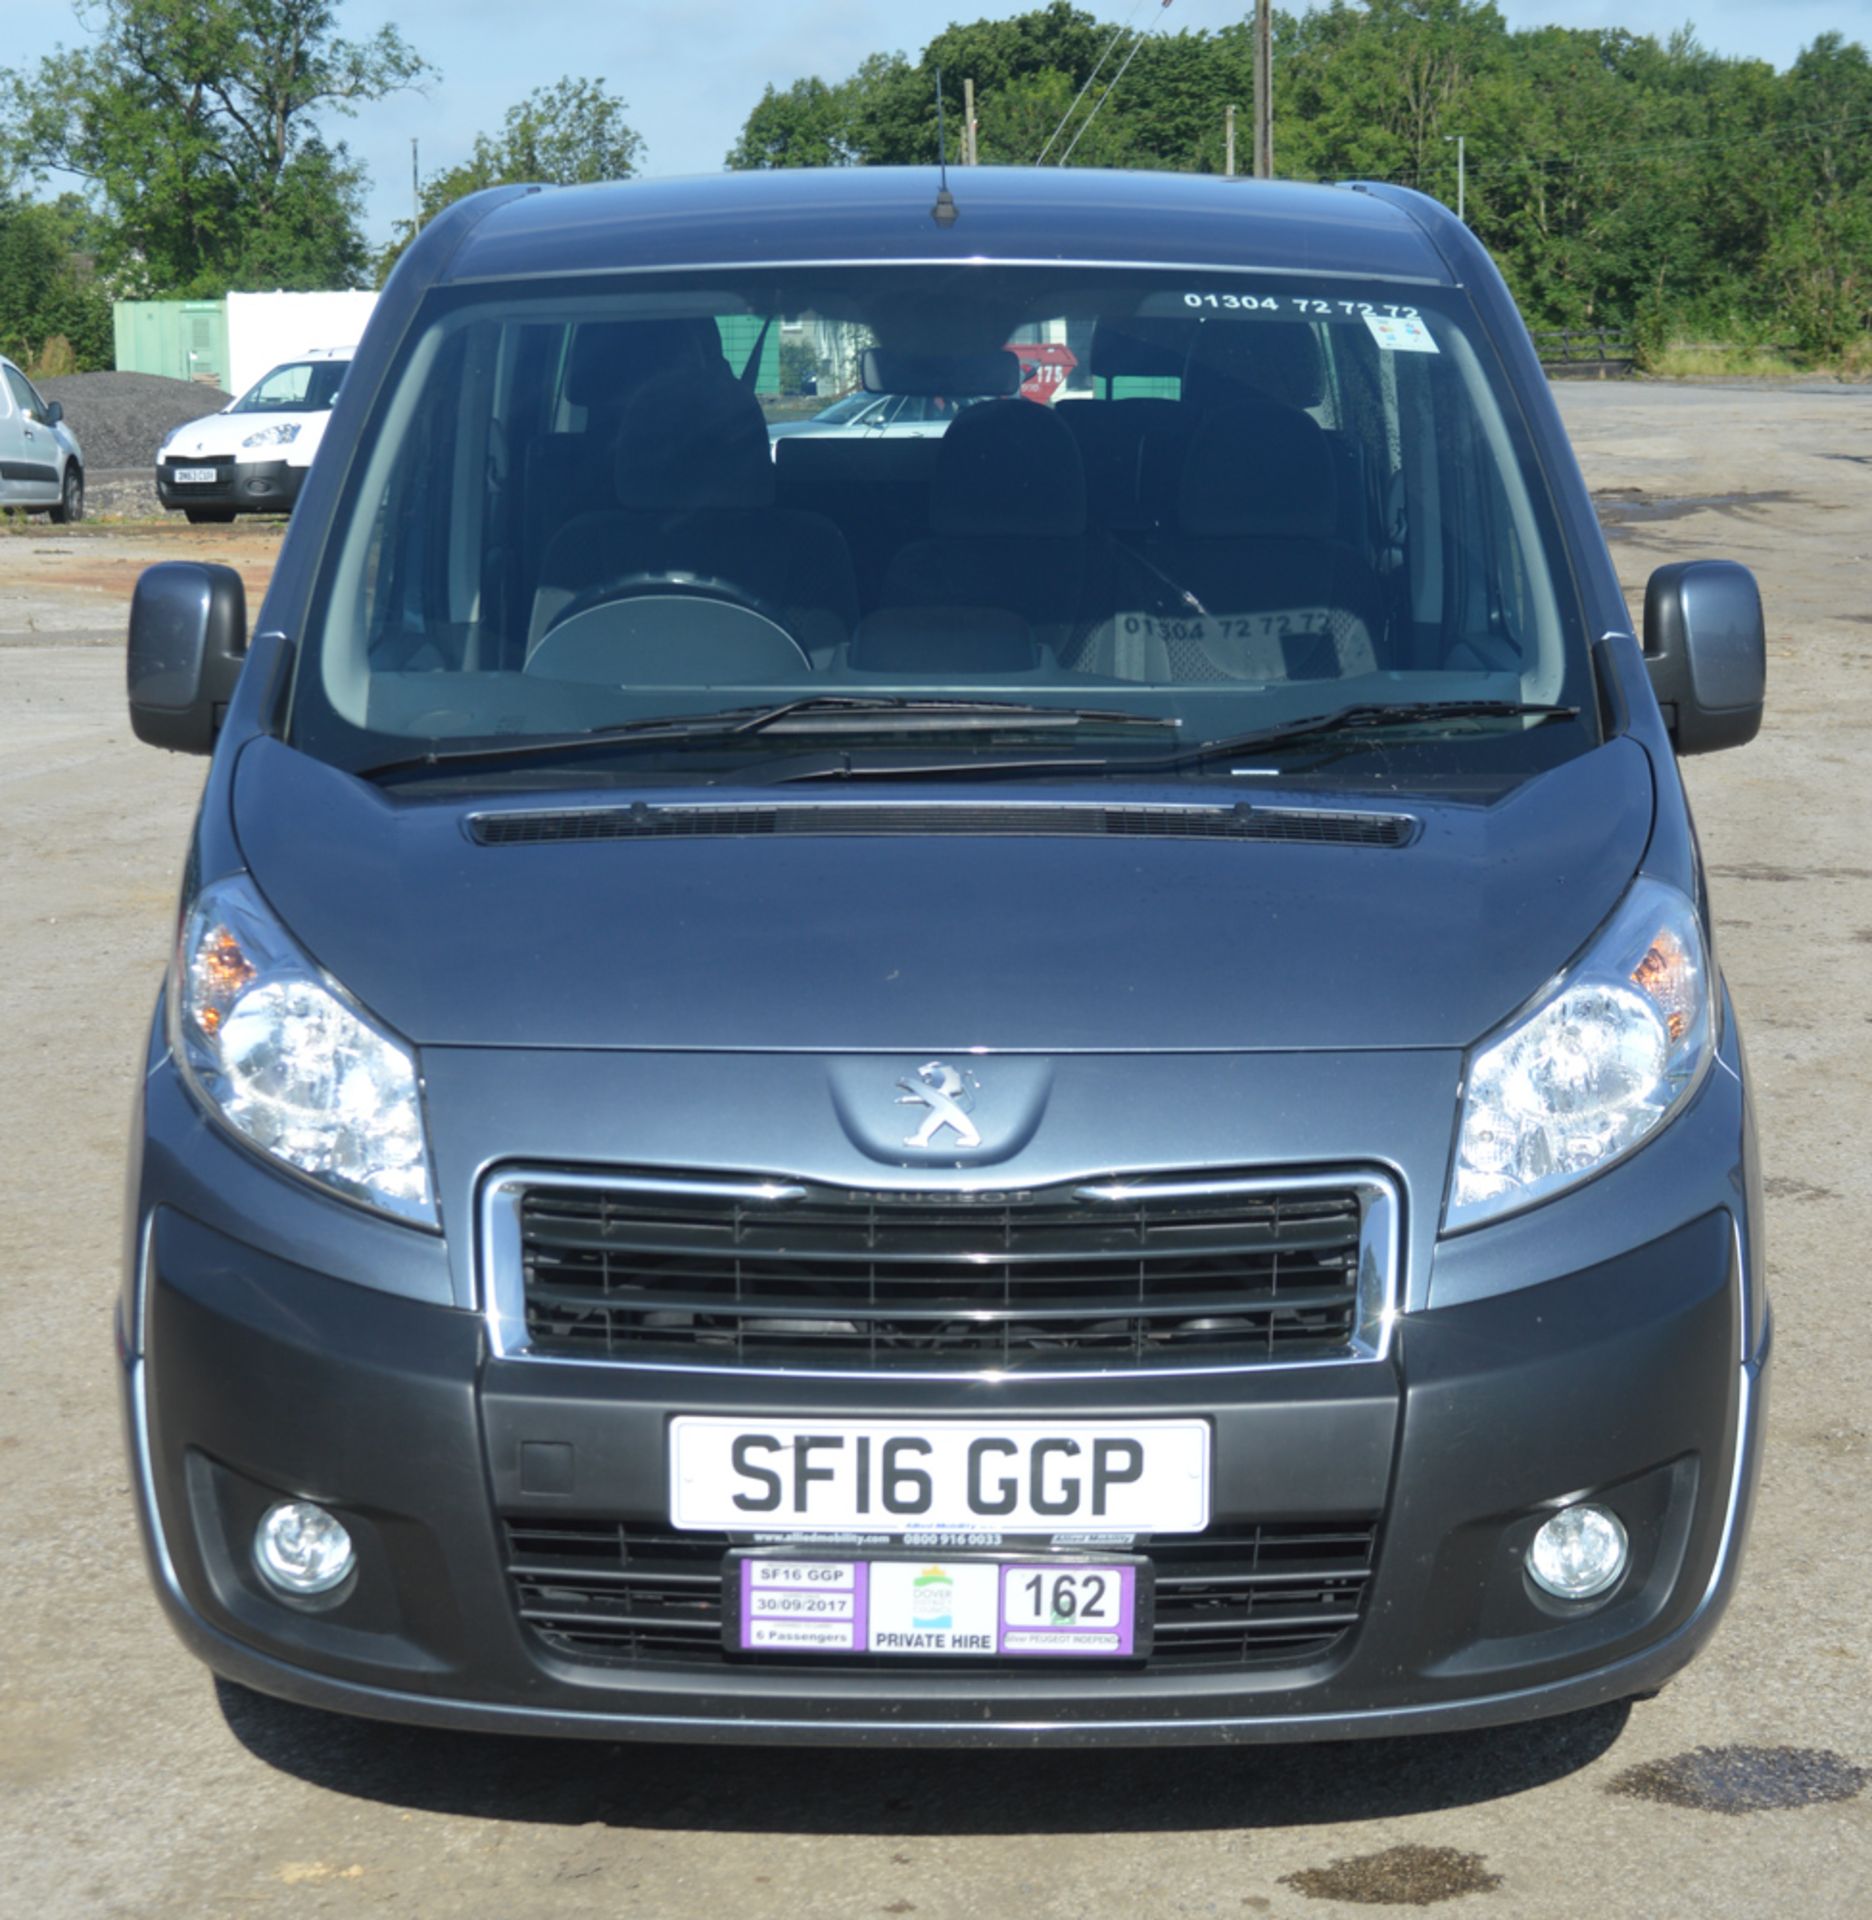 Peugeot Expert Tepee Independence SE Plus 6 seater minibus Registration number: SF16 GGP Date of - Image 5 of 13